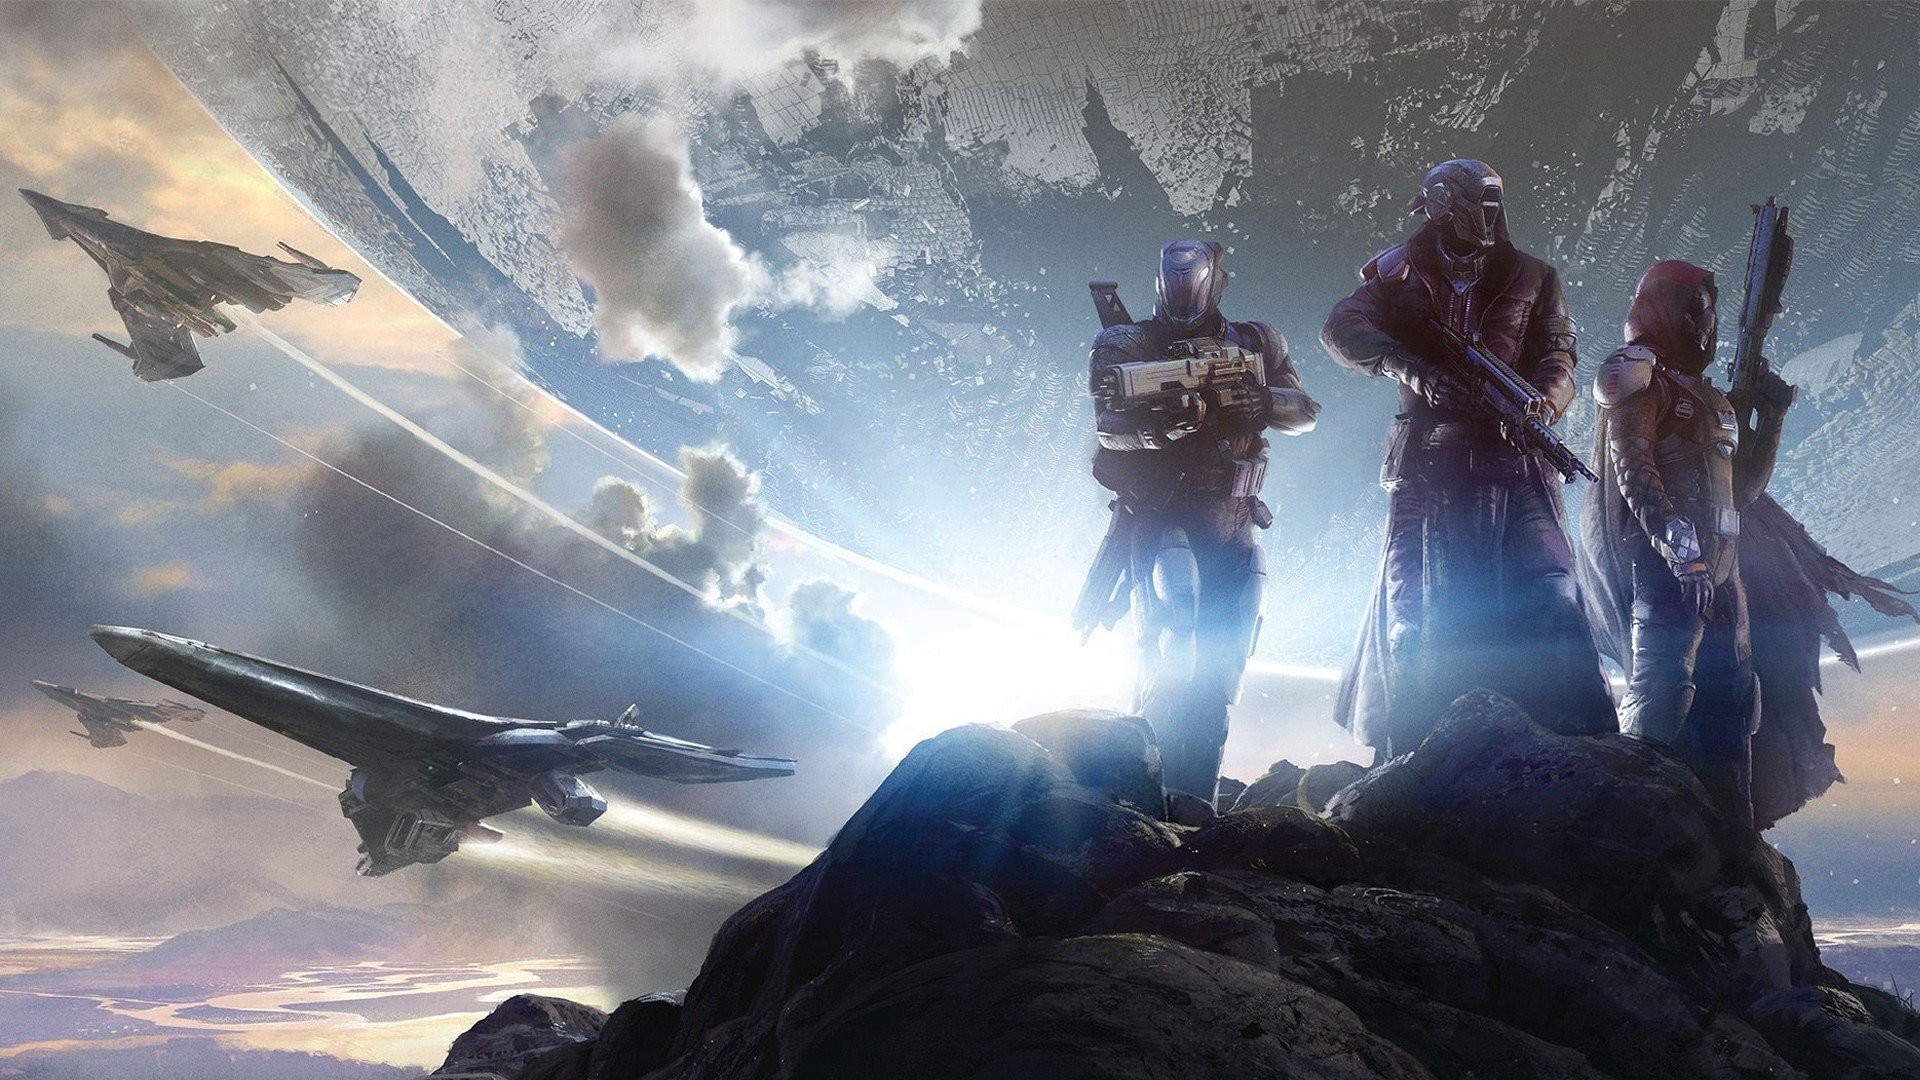 1920x1080 Destiny The Taken King Wallpaper 6. by Josh Sack | Oct 6, 2015 | 0 comments